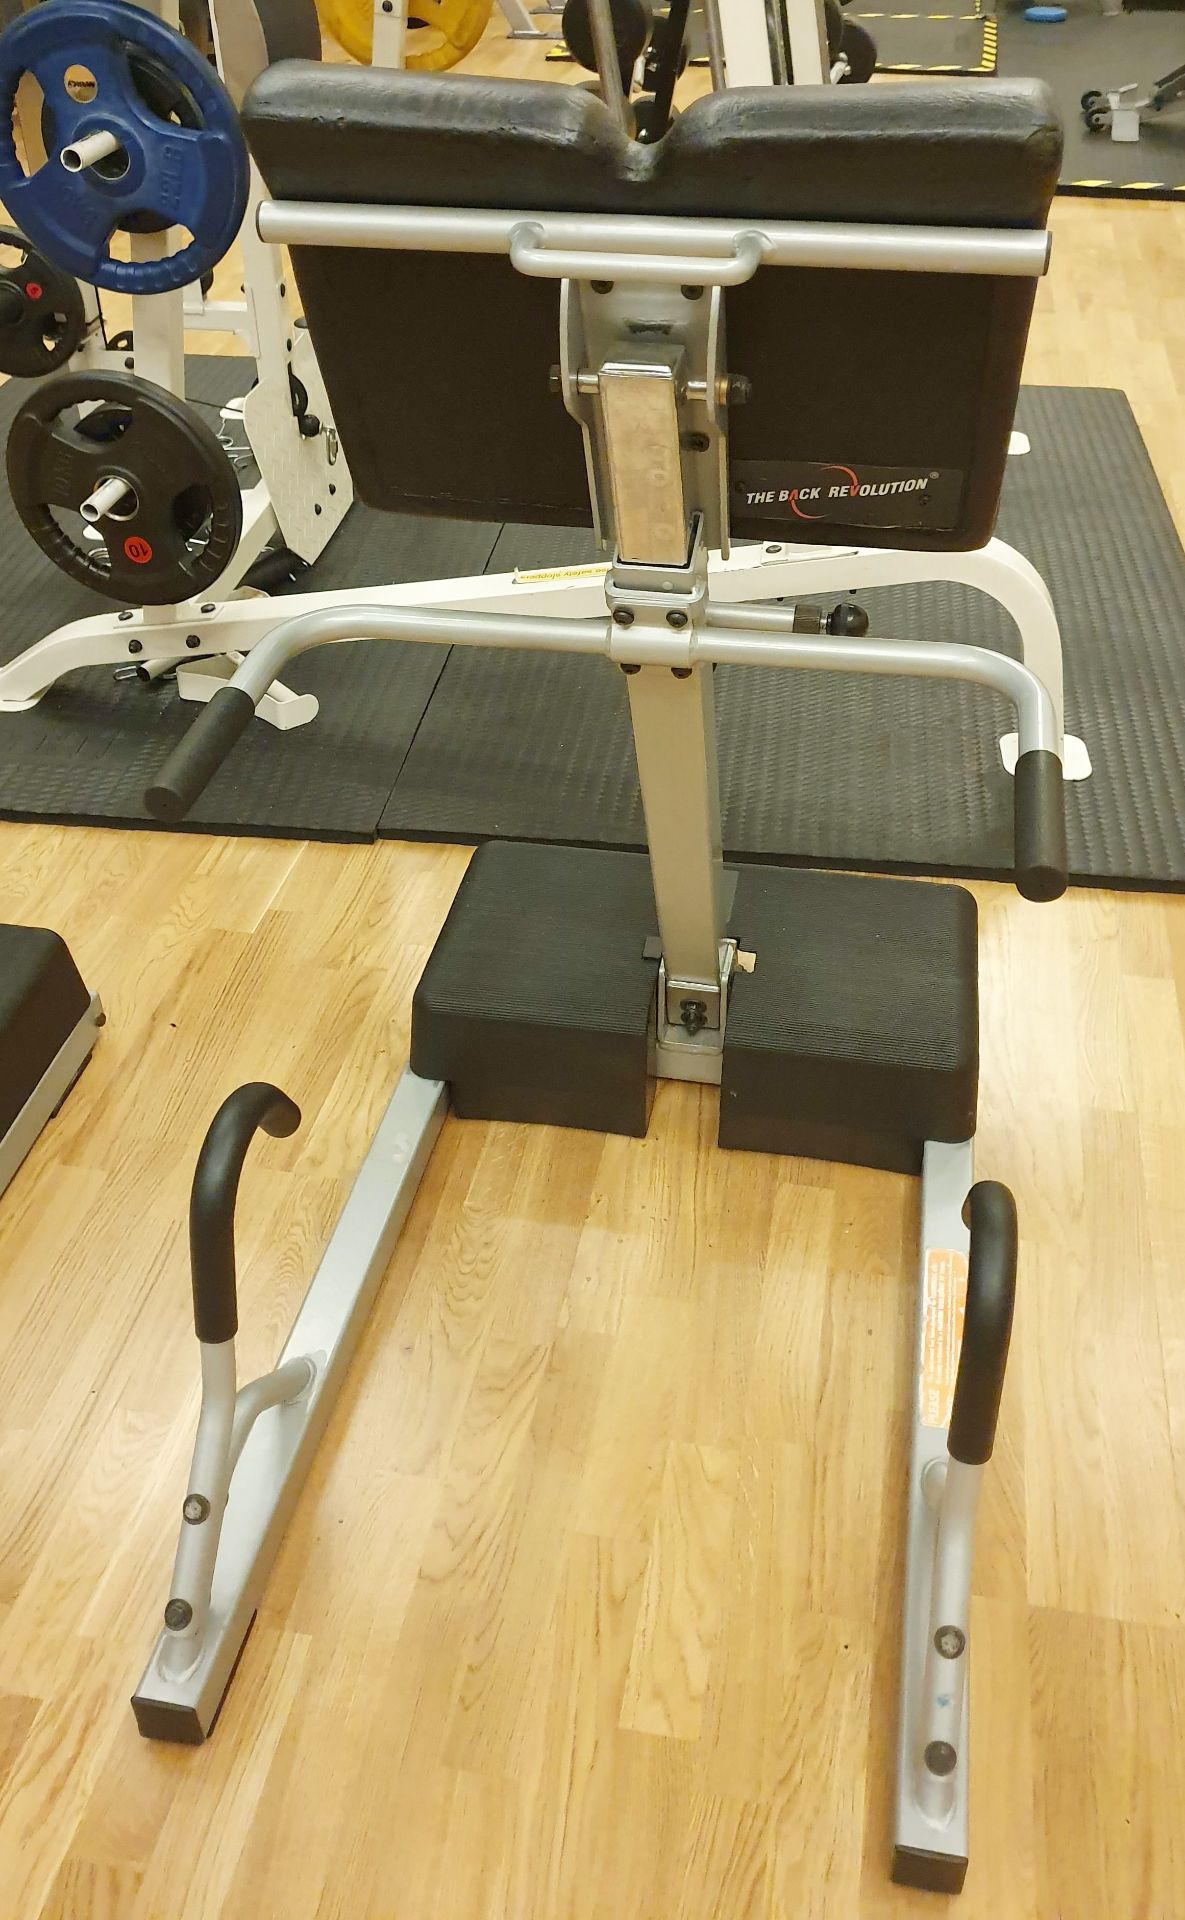 1 x Back Revolution Exercise Stretching Gym Machine - CL552 - Location: Altrincham WA14 - Image 3 of 8